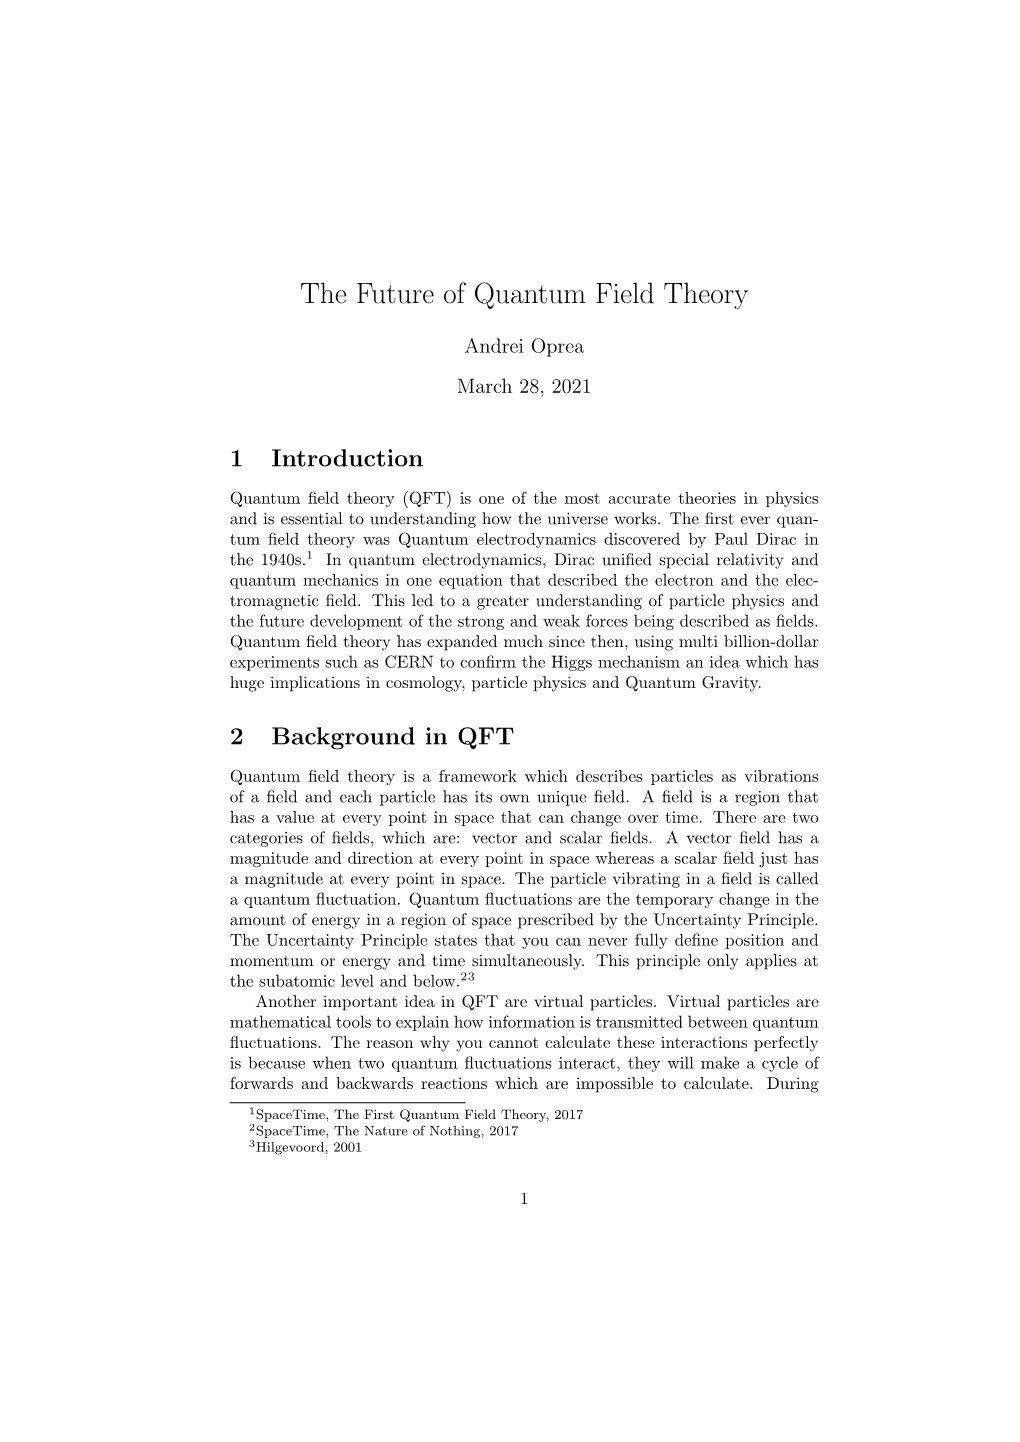 The Future of Quantum Field Theory